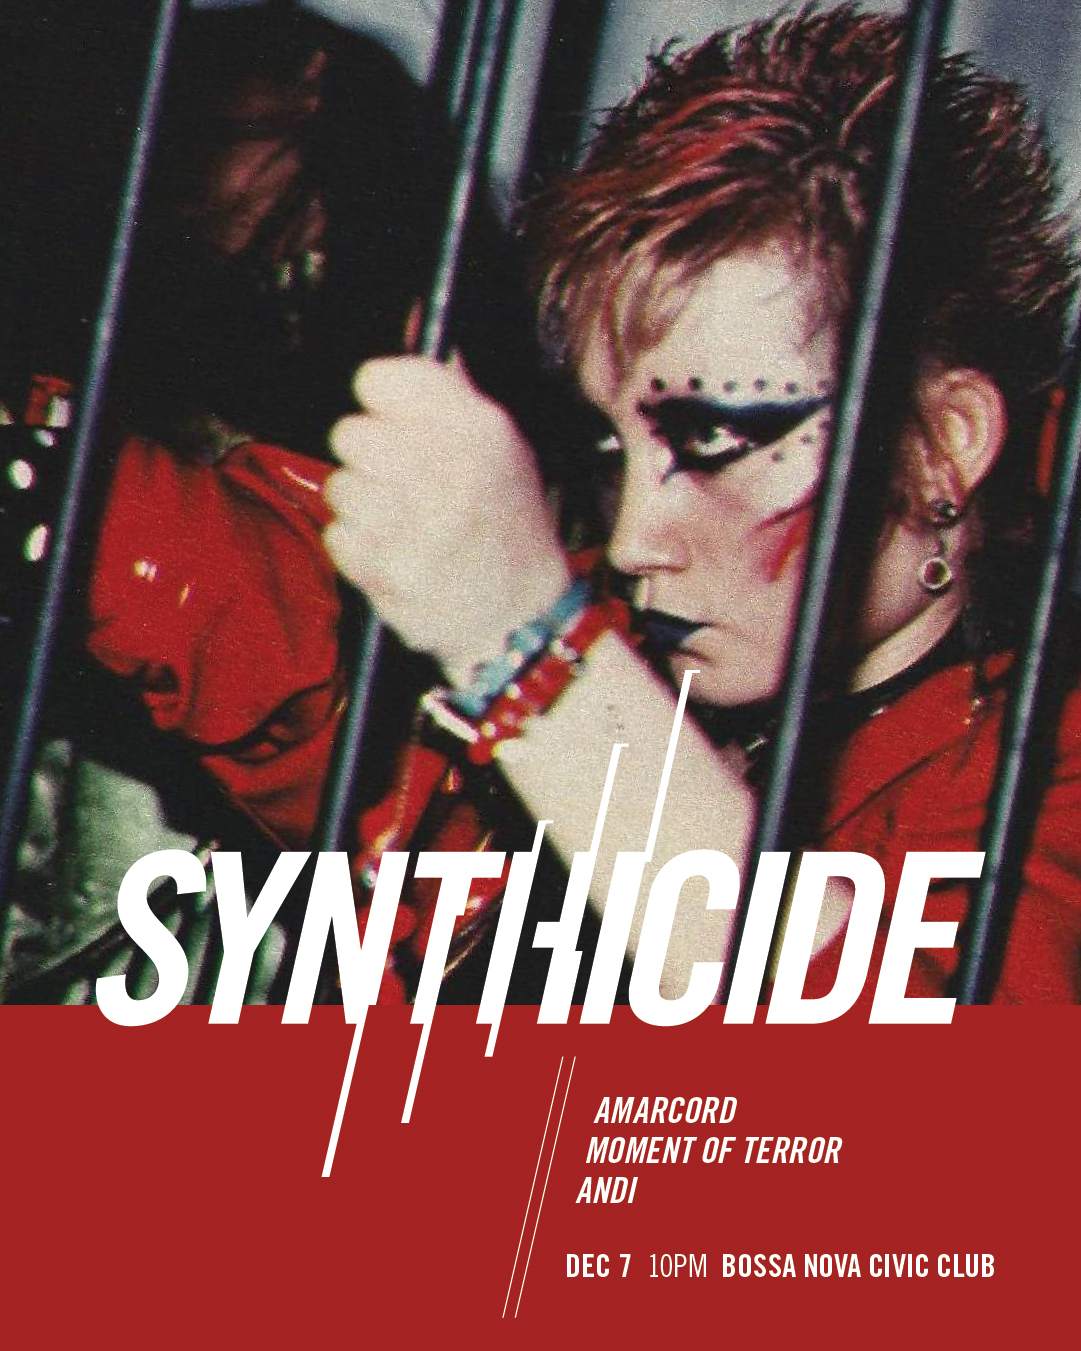 Synthicide with Amarcord, Moment of Terror, Andi - フライヤー表